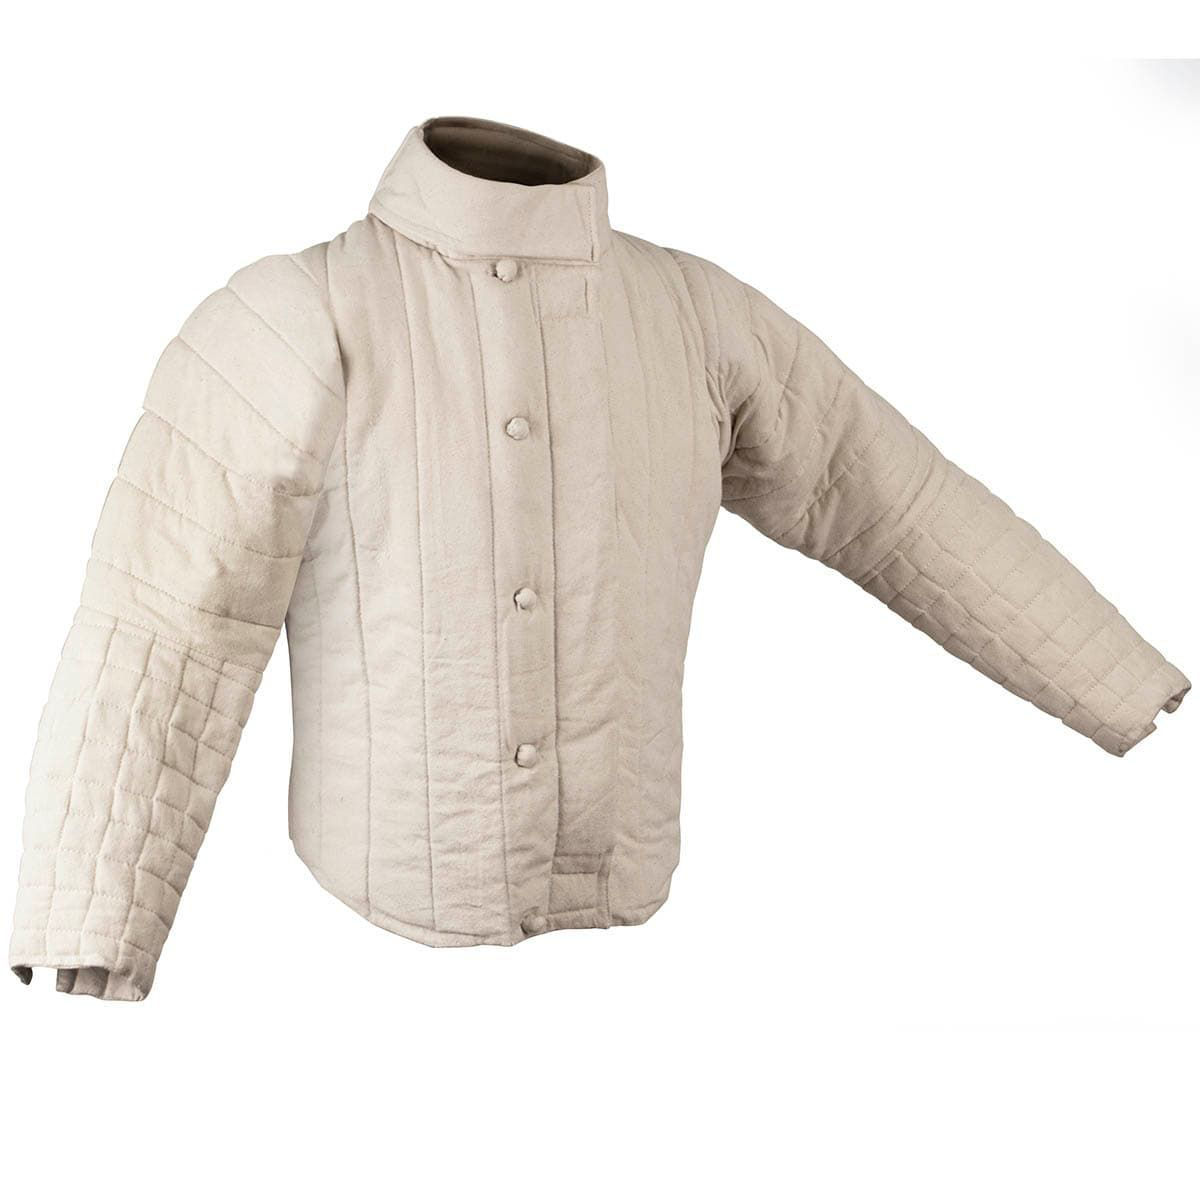 Canvas grade cotton fencing jacket with thick padding and Velcro closure